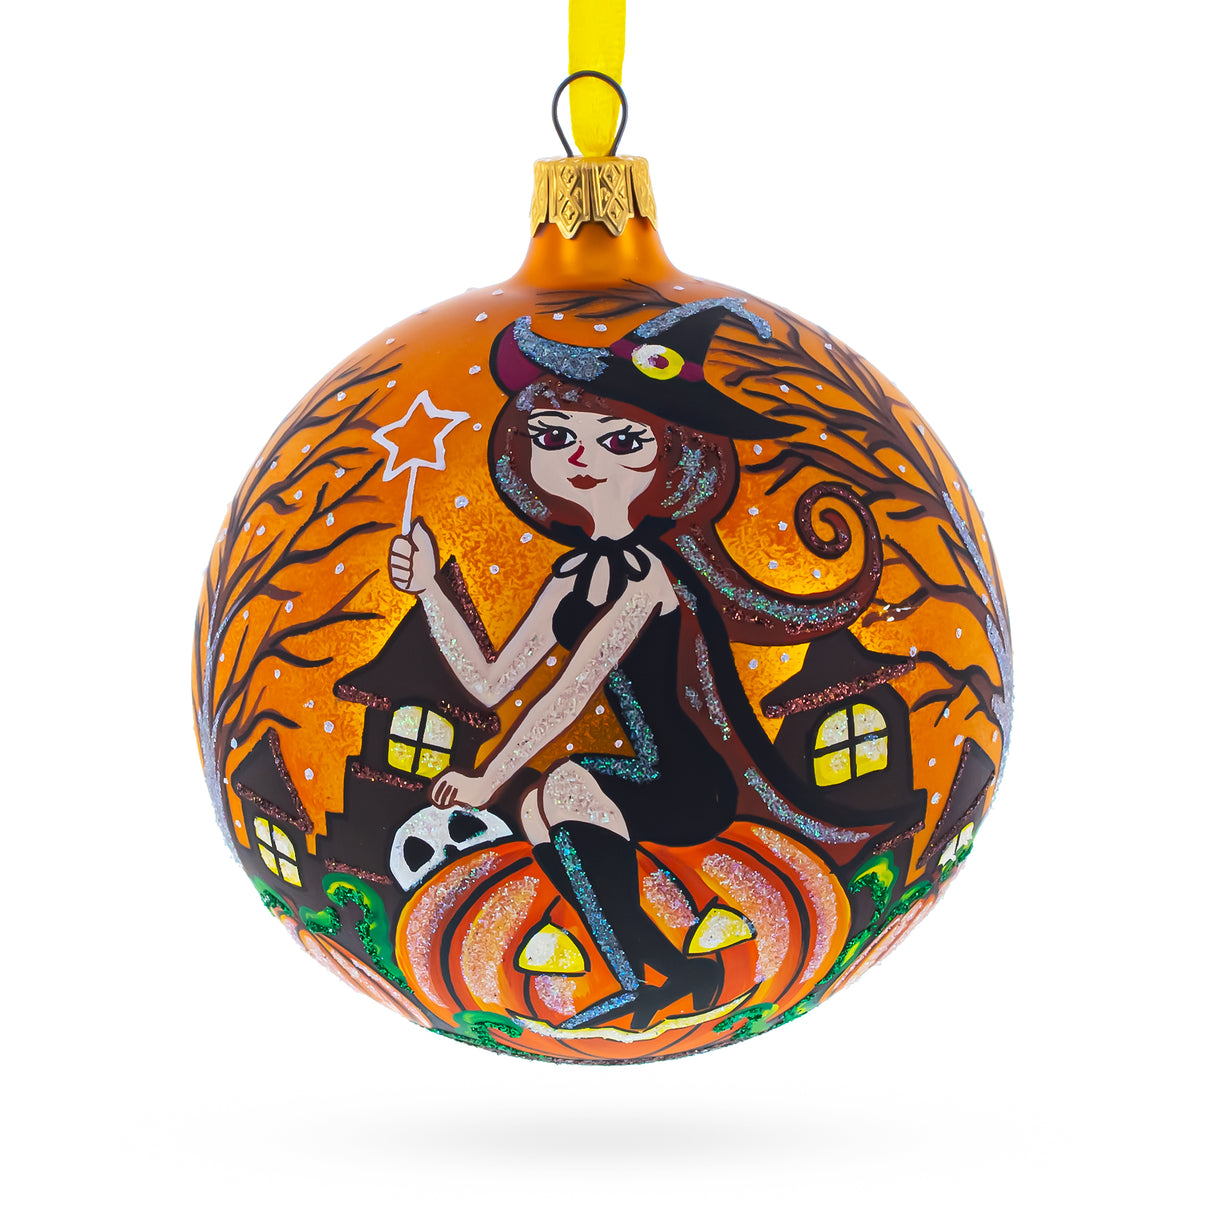 Glass Enchanting Witch Riding Pumpkin Glass Ball Halloween Ornament 4 Inches in Orange color Round